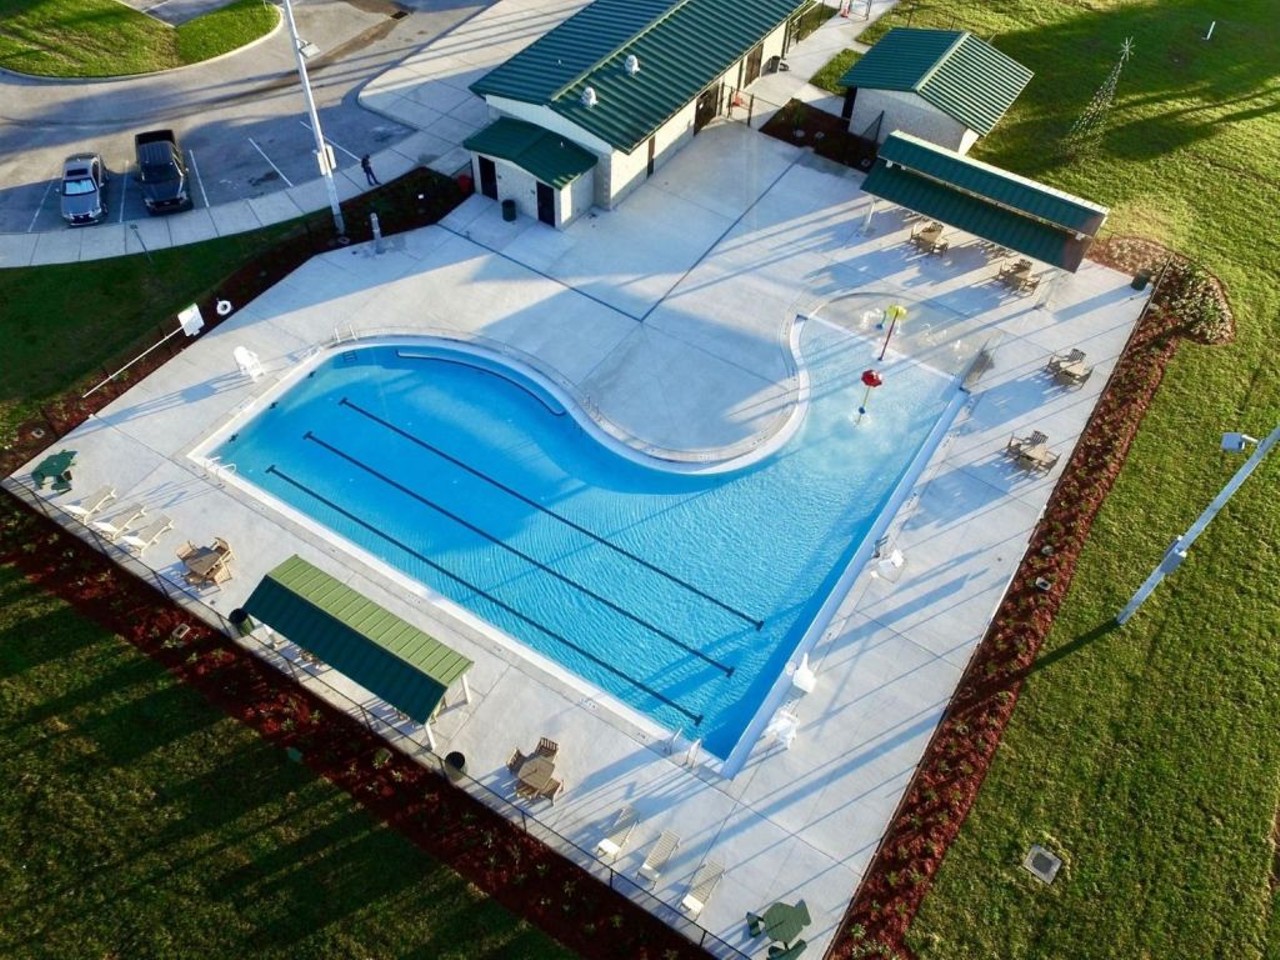 Lake Eva Aquatic Center 
321 S. Sixth St., Haines City, FL 33844, (863) 421-3715
This aquatic facility has space for adults and children. The entry fee is $3 (children under age 2 can swim free). They offer swimming lessons and a splash pad for kids. 
Photo via Haines City